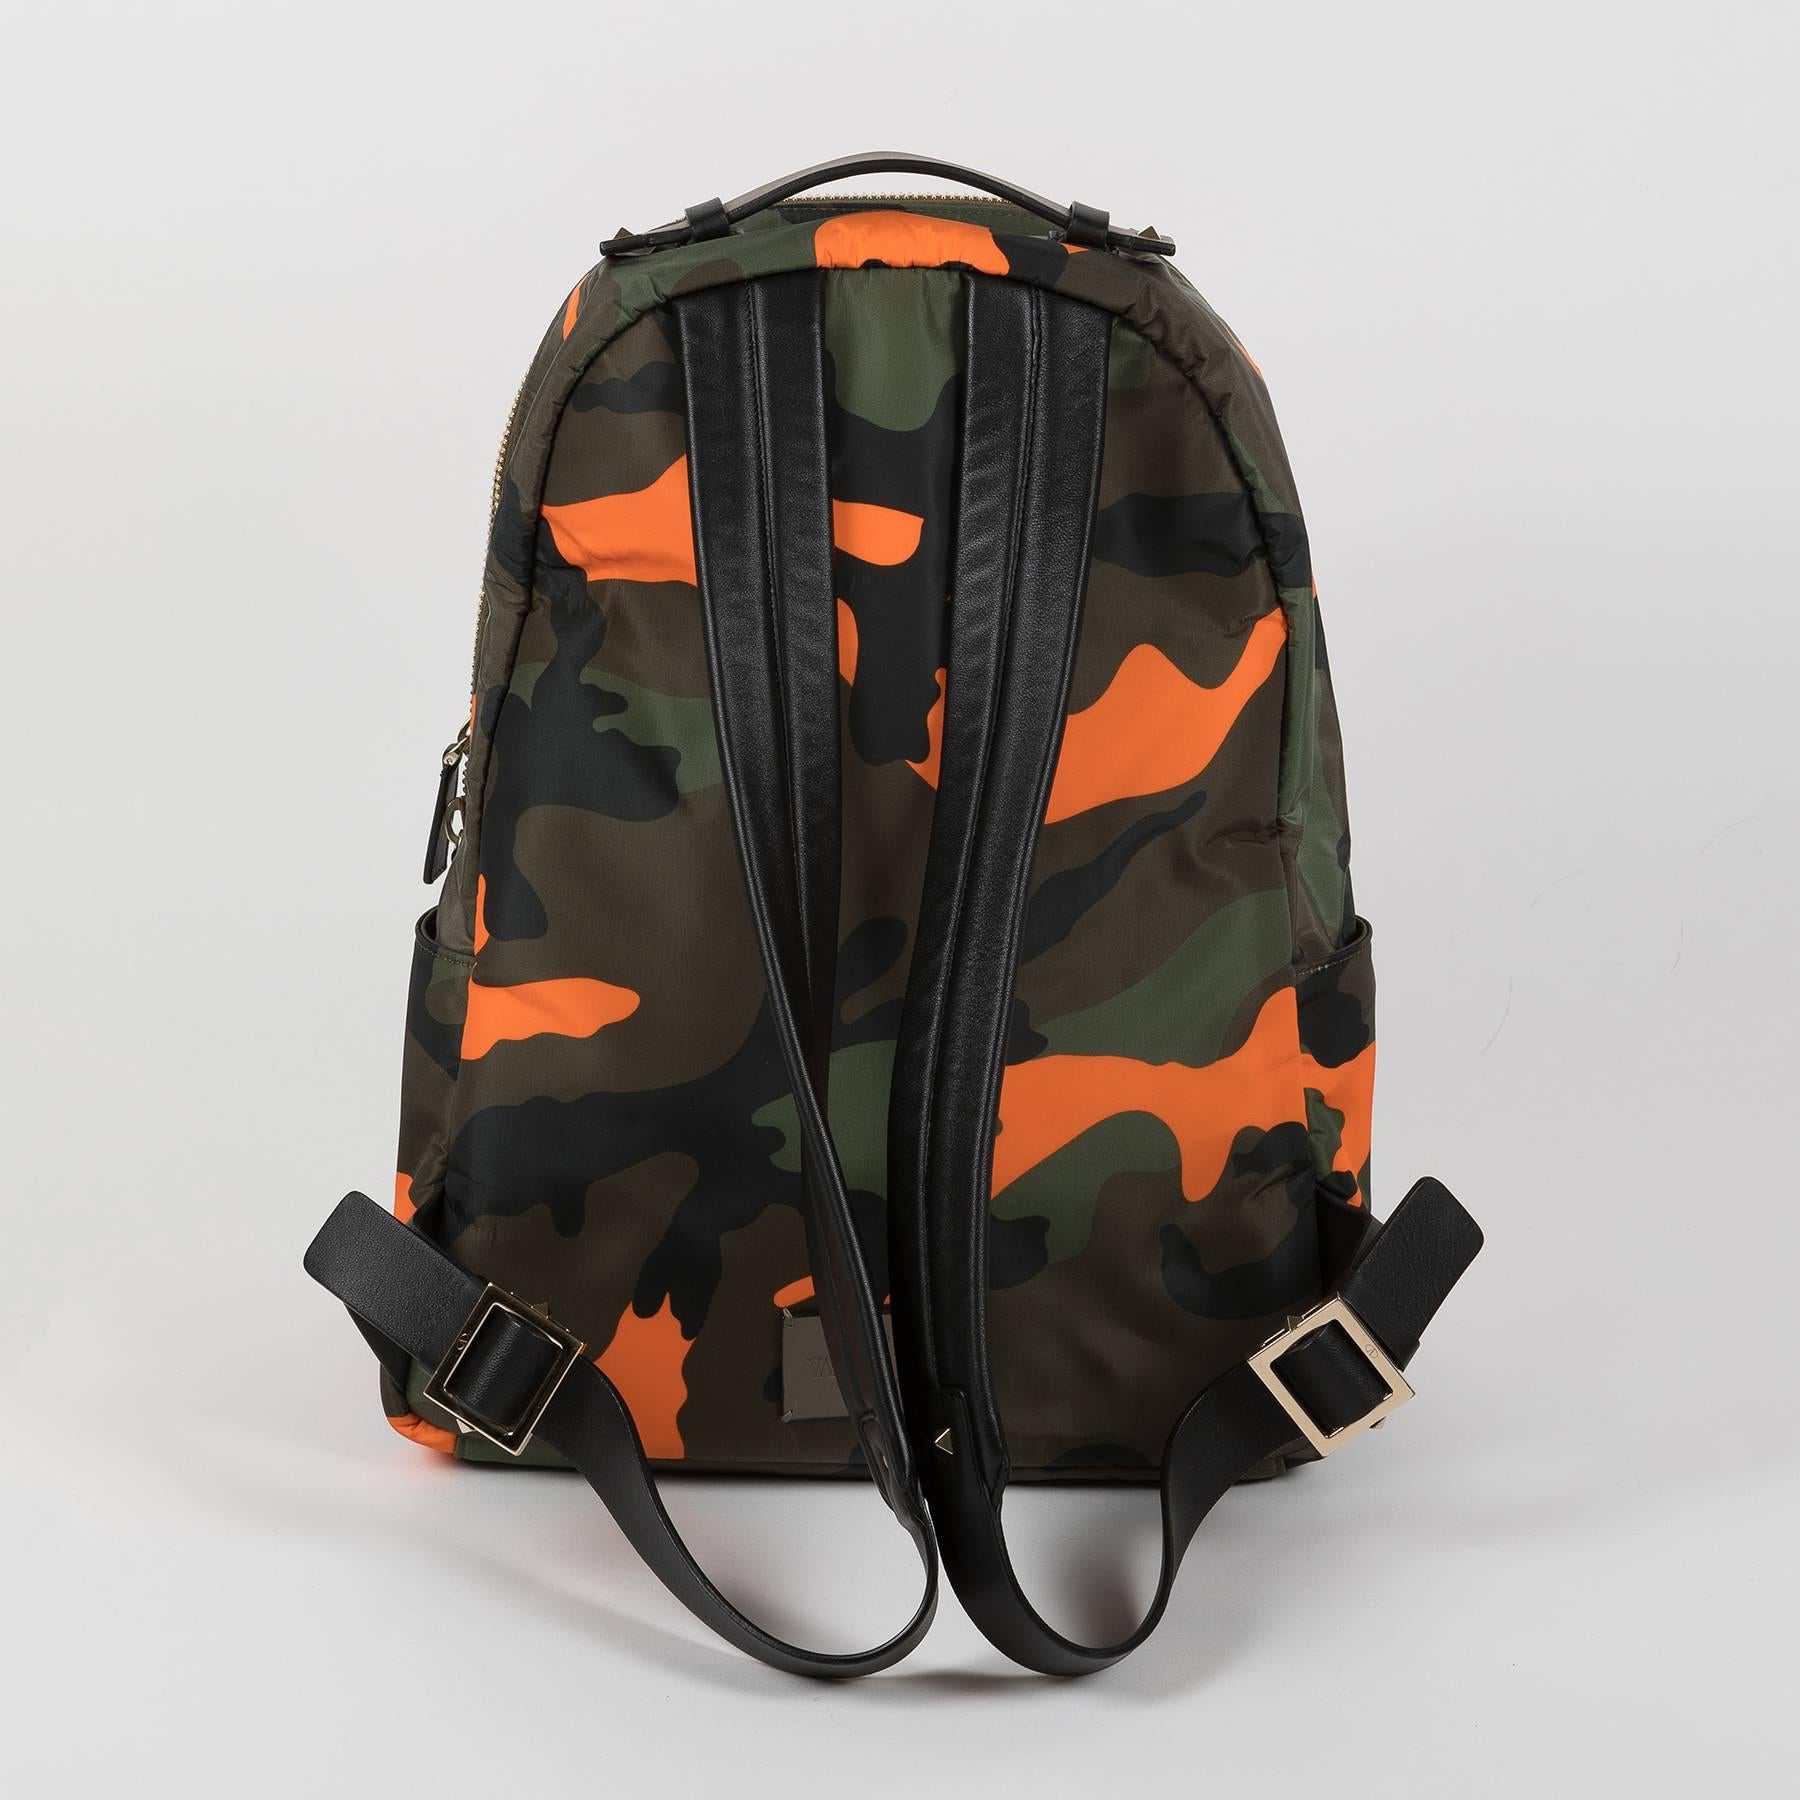 Valentino Garavani's Rockstud Man's backpack with camouflage motif and golden hardware.
Materials: nylon and black and brown leather
New, never worn. 
The backpack comes with its original dustbag.